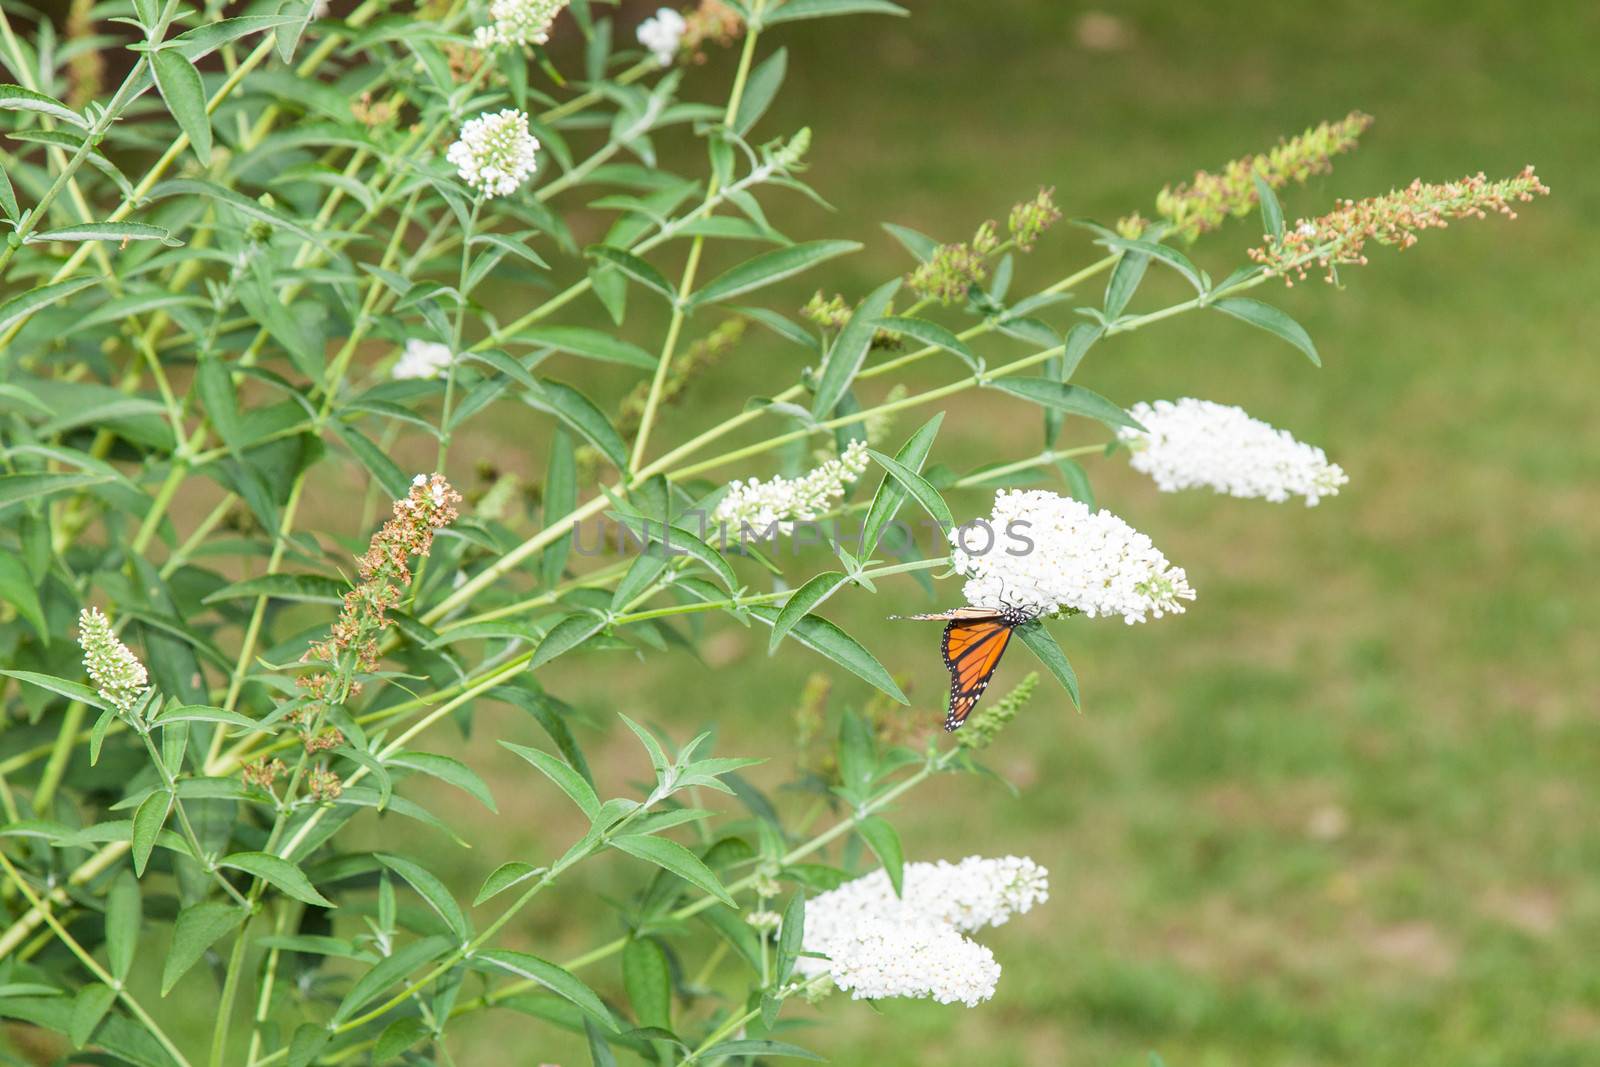 Monarch butterfly (Danaus plexippus) is a milkweed butterfly in the family Nymphalidae.